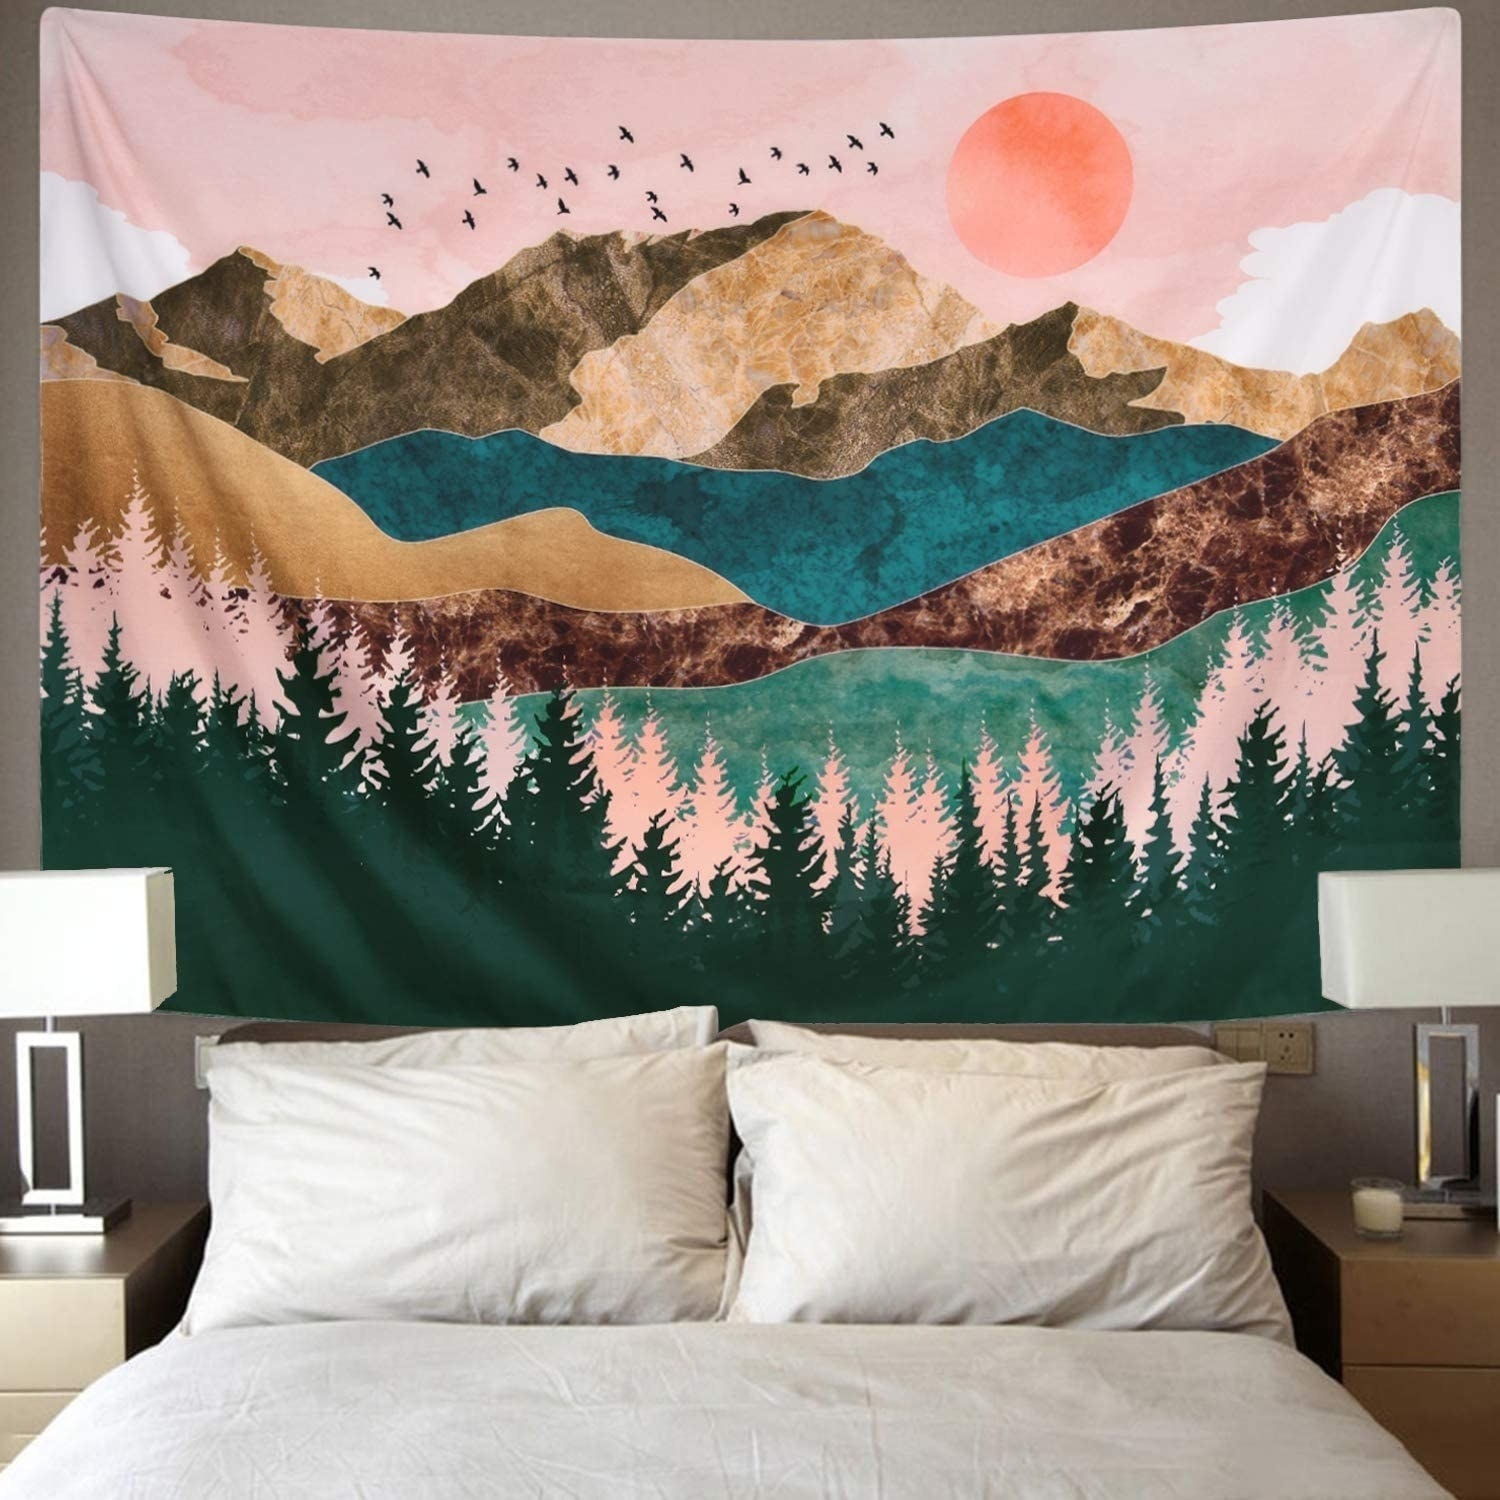 The vividly colored tapestry, featuring trees, mountains, birds, and more, hanging above a bed